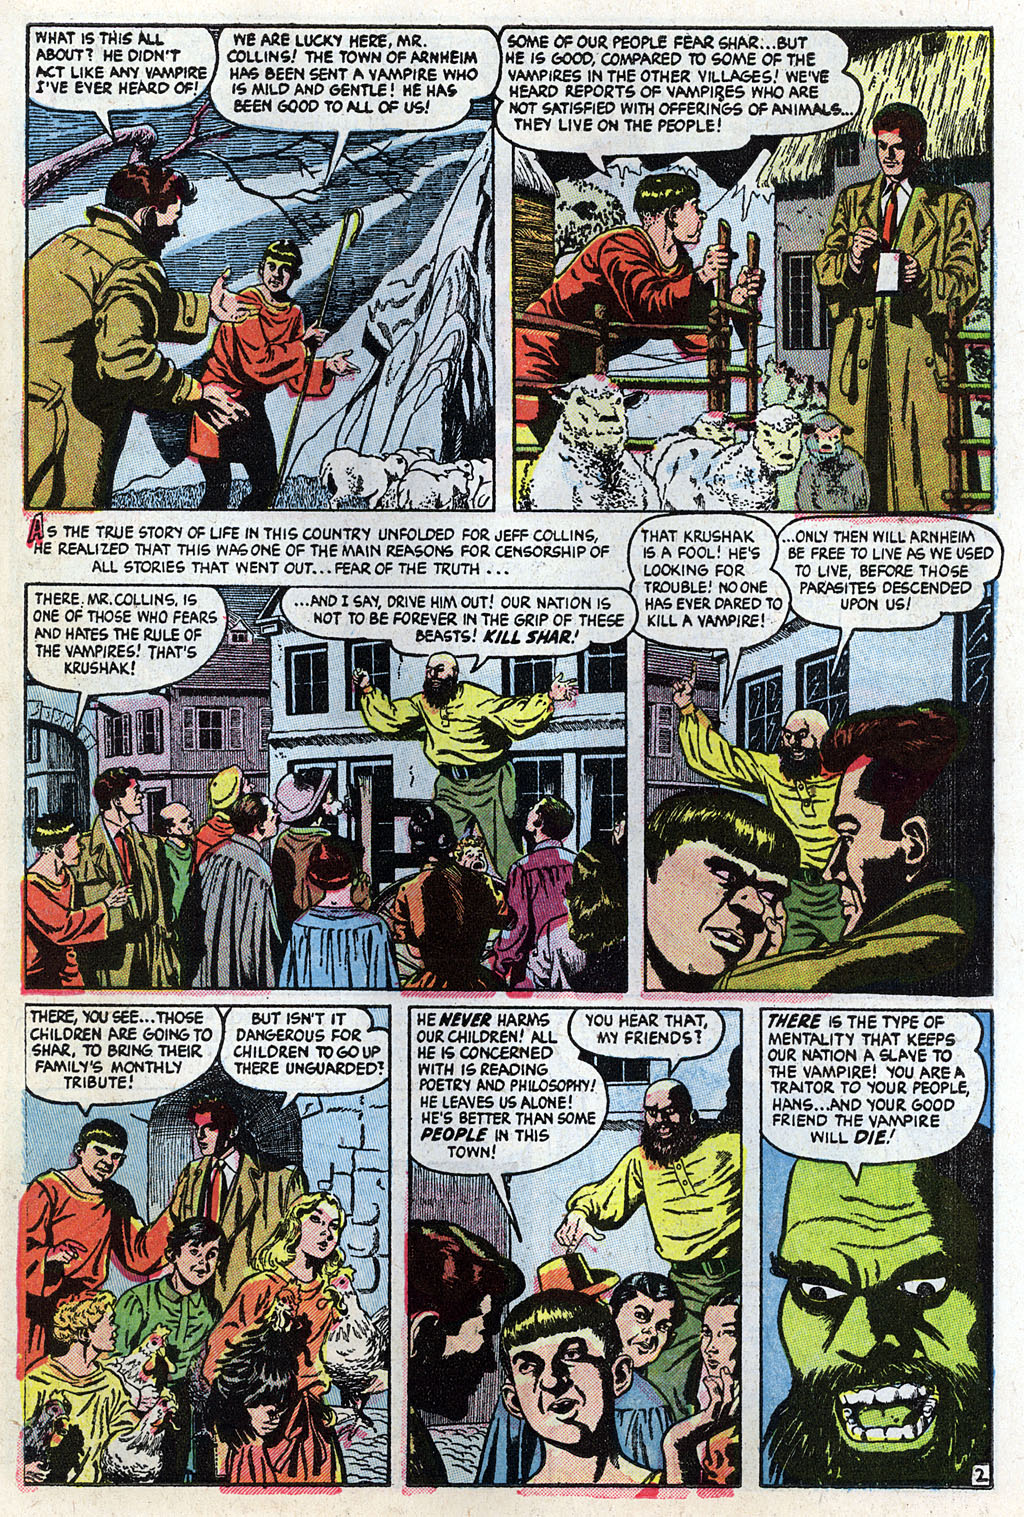 Marvel Tales (1949) 128 Page 10